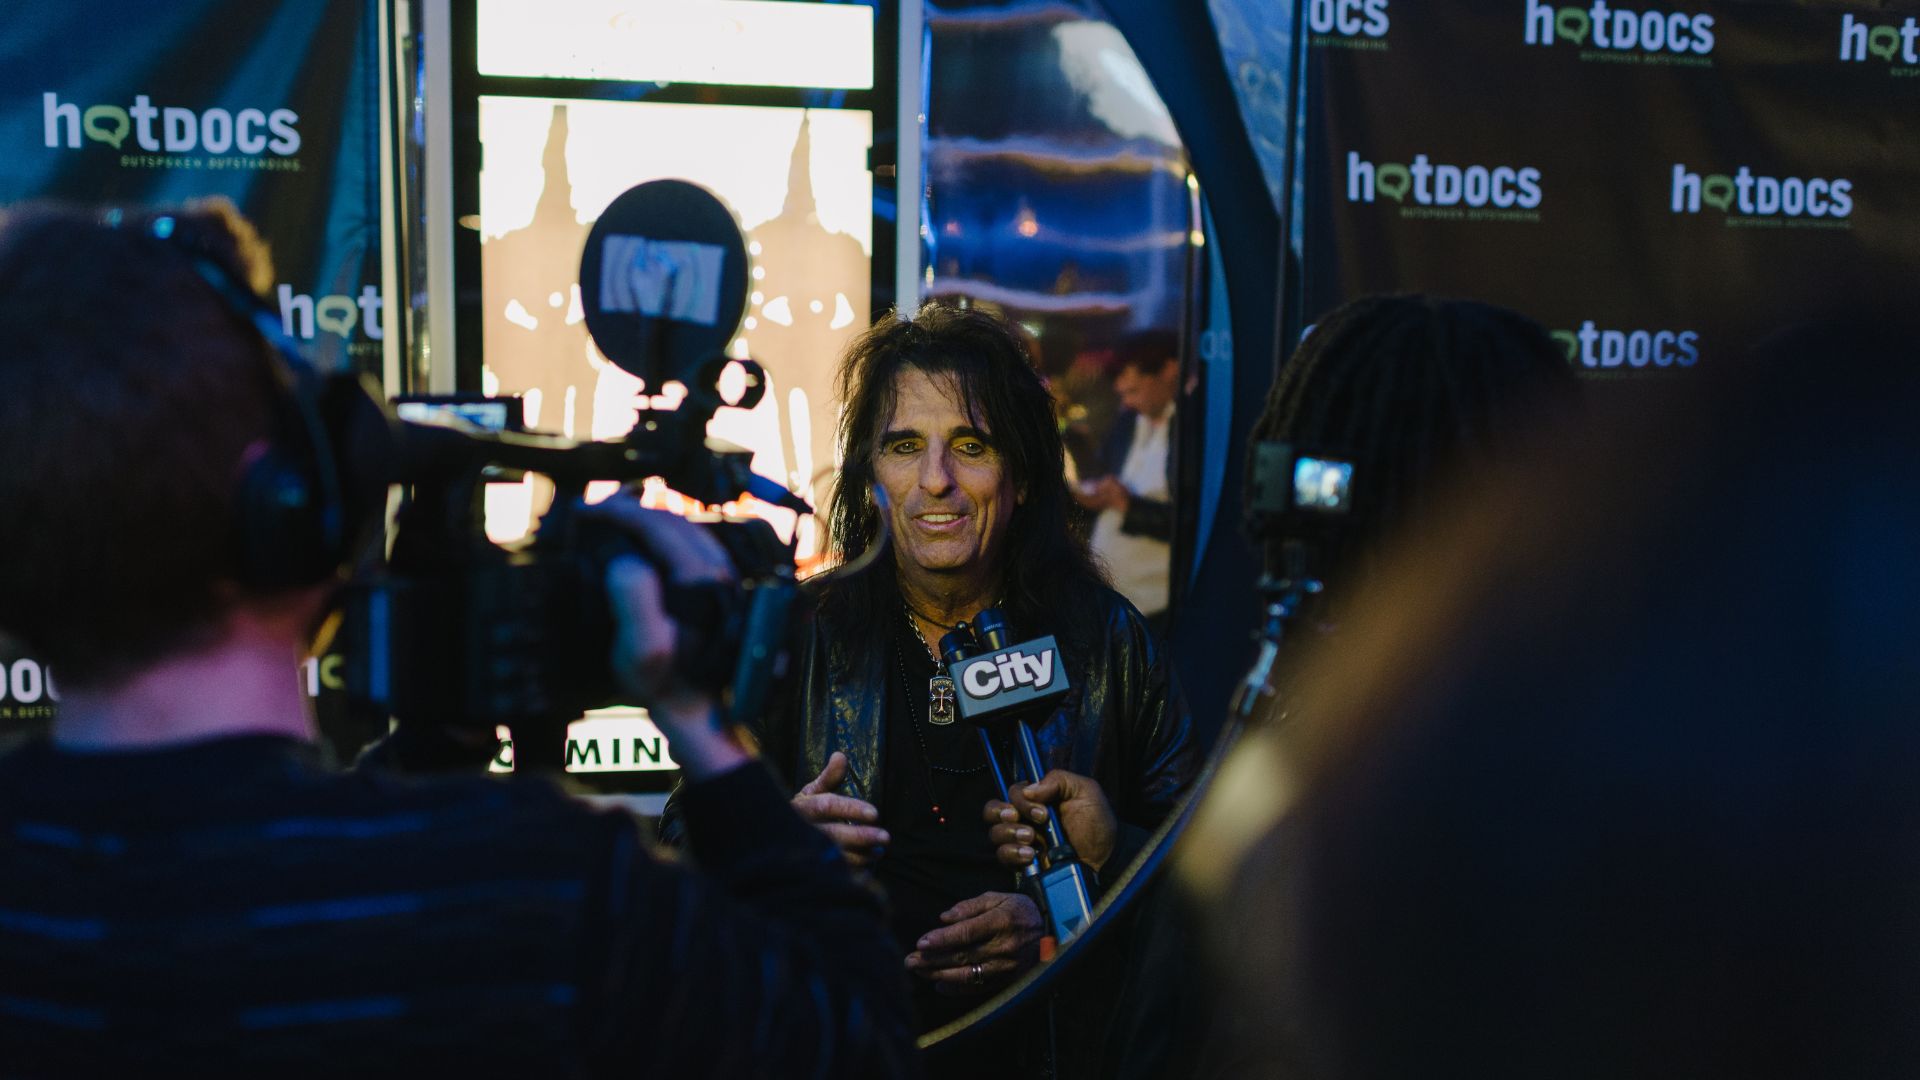 Alice Cooper speaking into a City News microphone surrounded by journalists outdoors with Hot Docs logo displayed in the background.